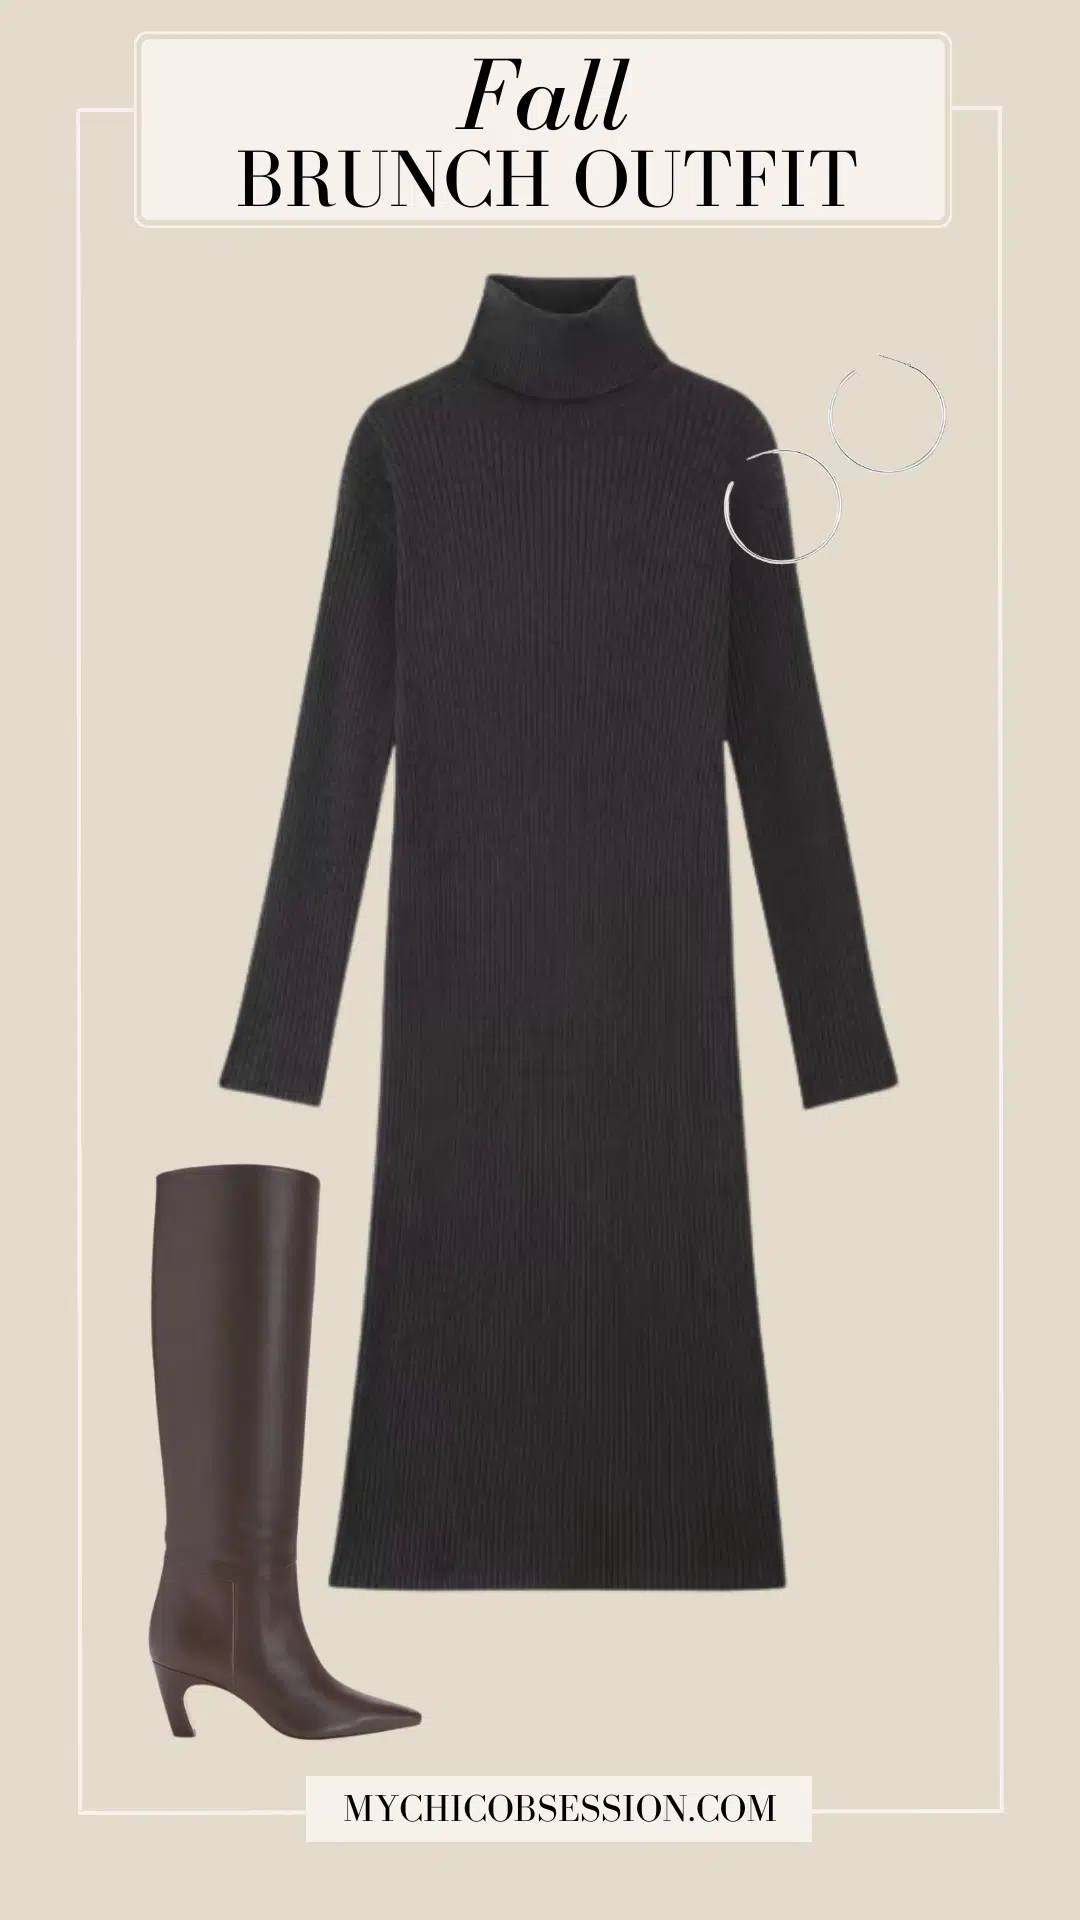 sweater dress and knee-high leather boots for a fall brunch outfit idea